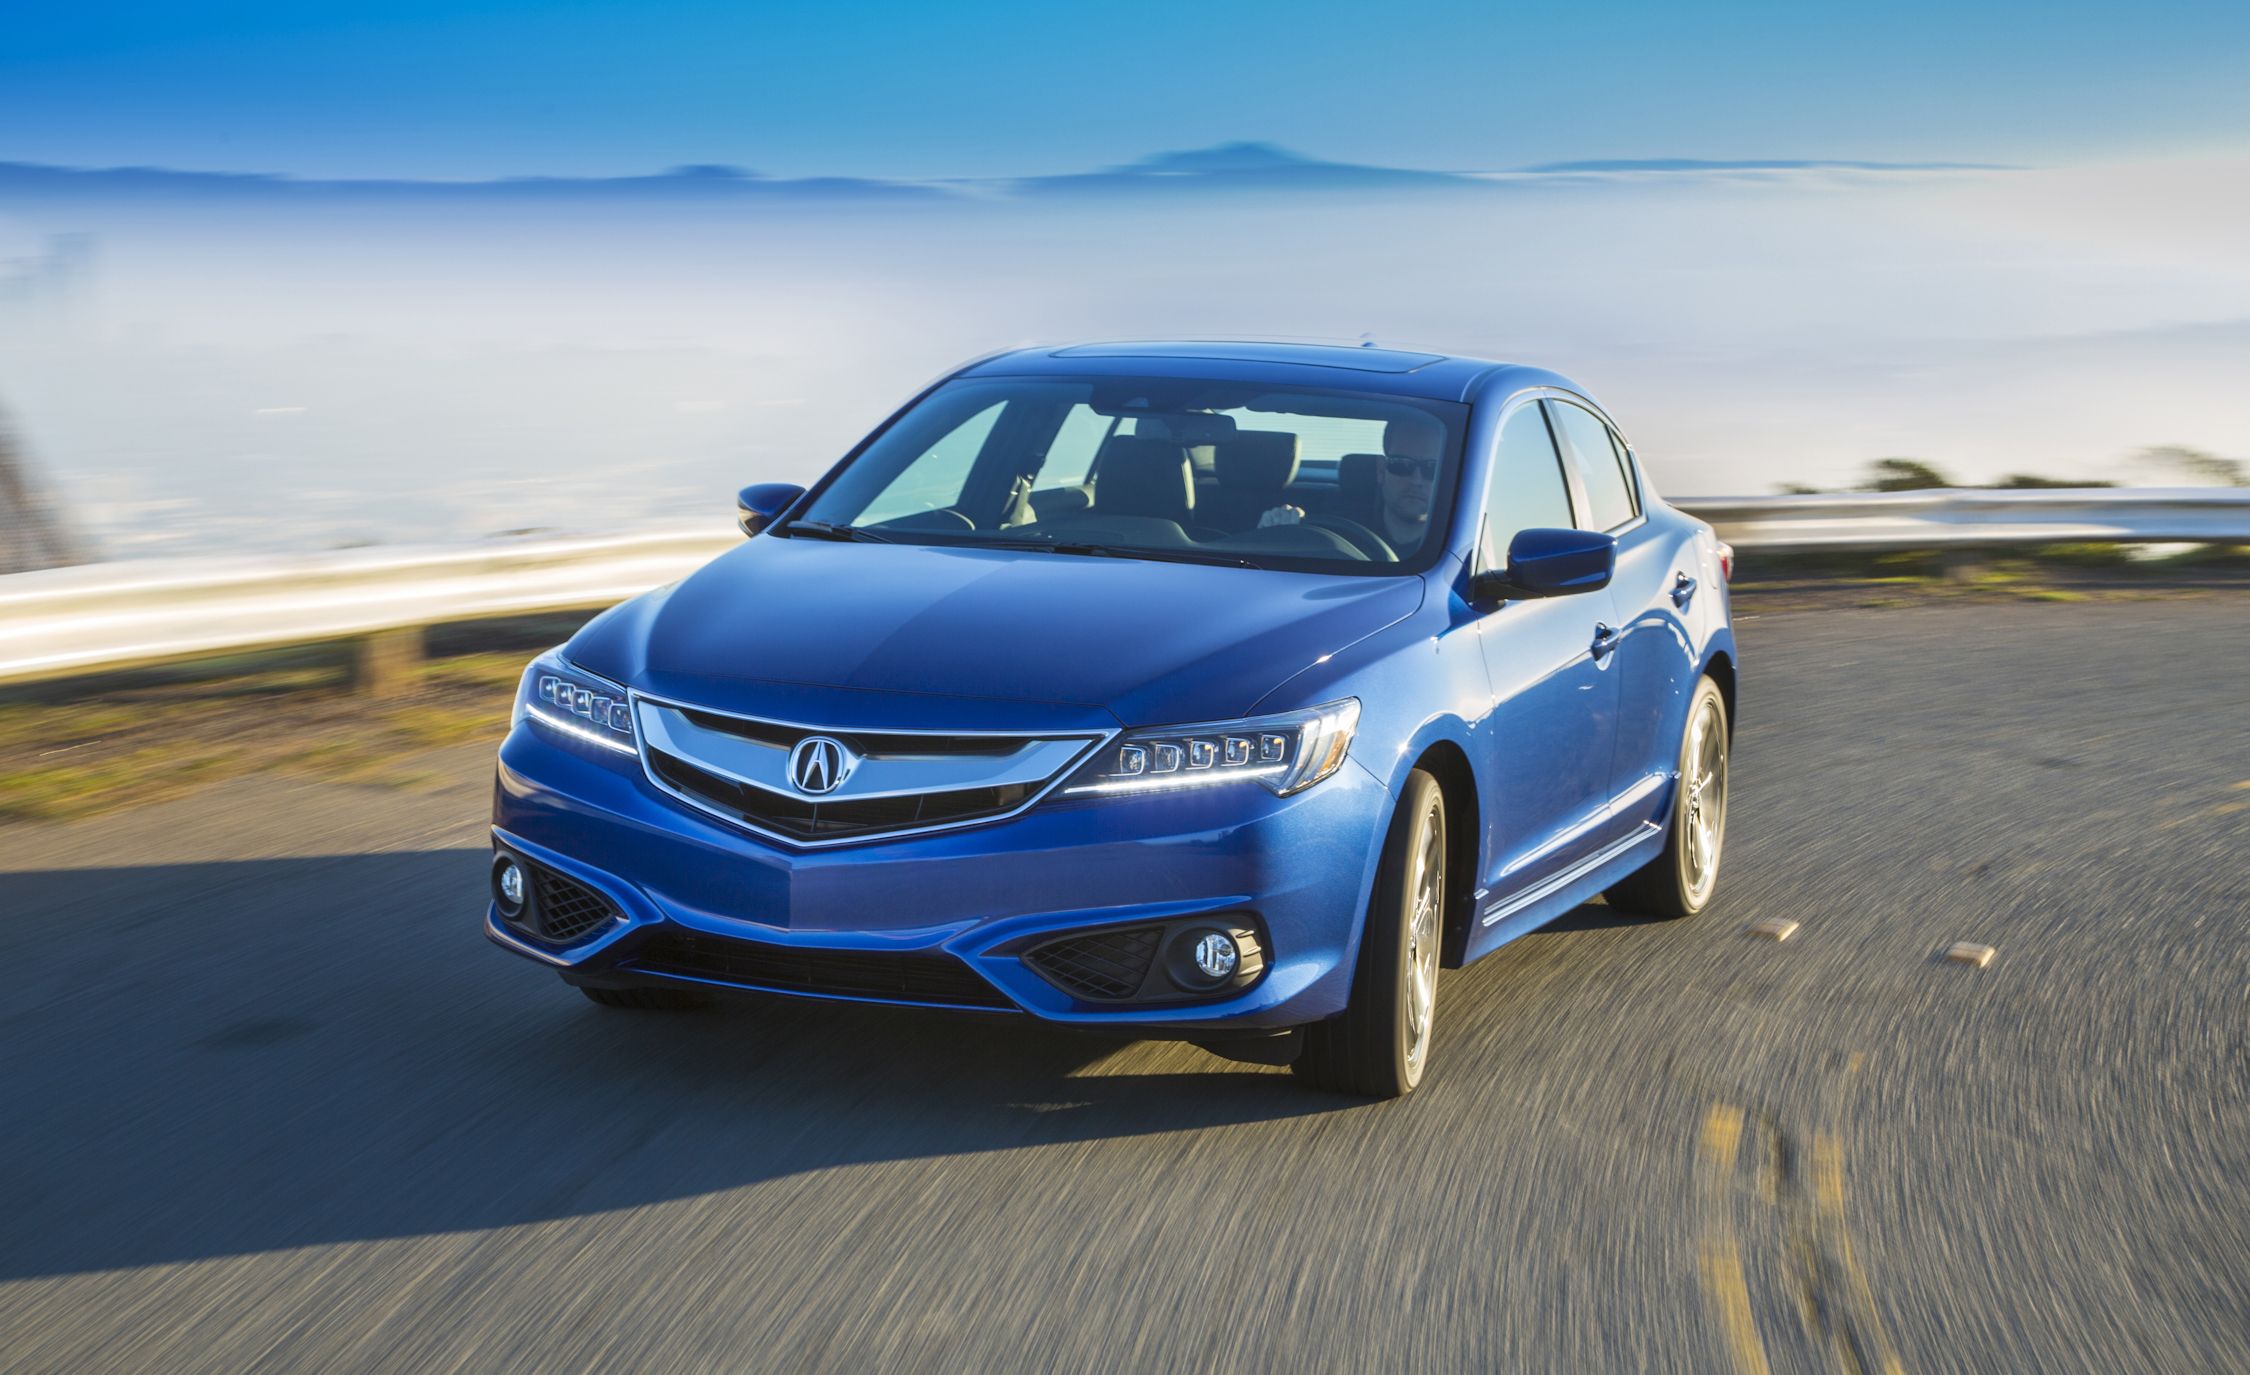 2016 Acura ILX Drive: It's Better, But . . .